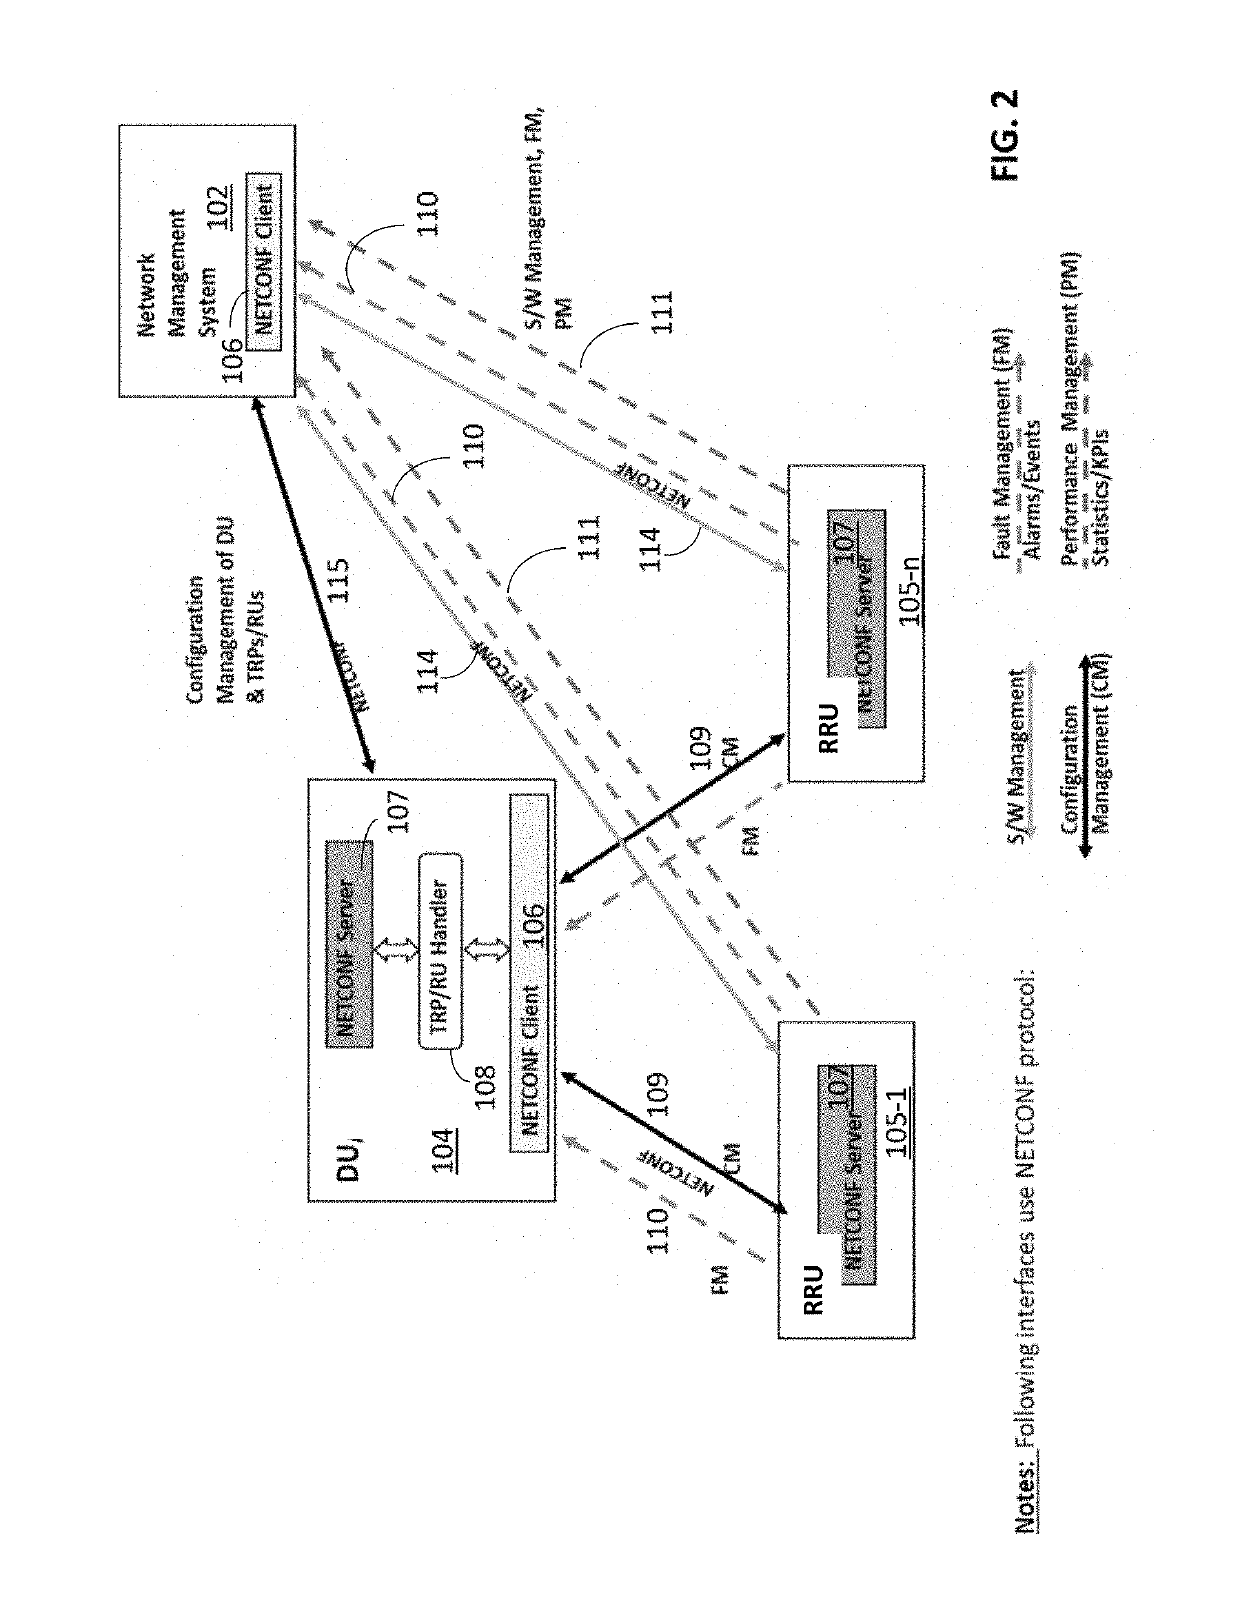 Management of radio units in cloud radio access networks